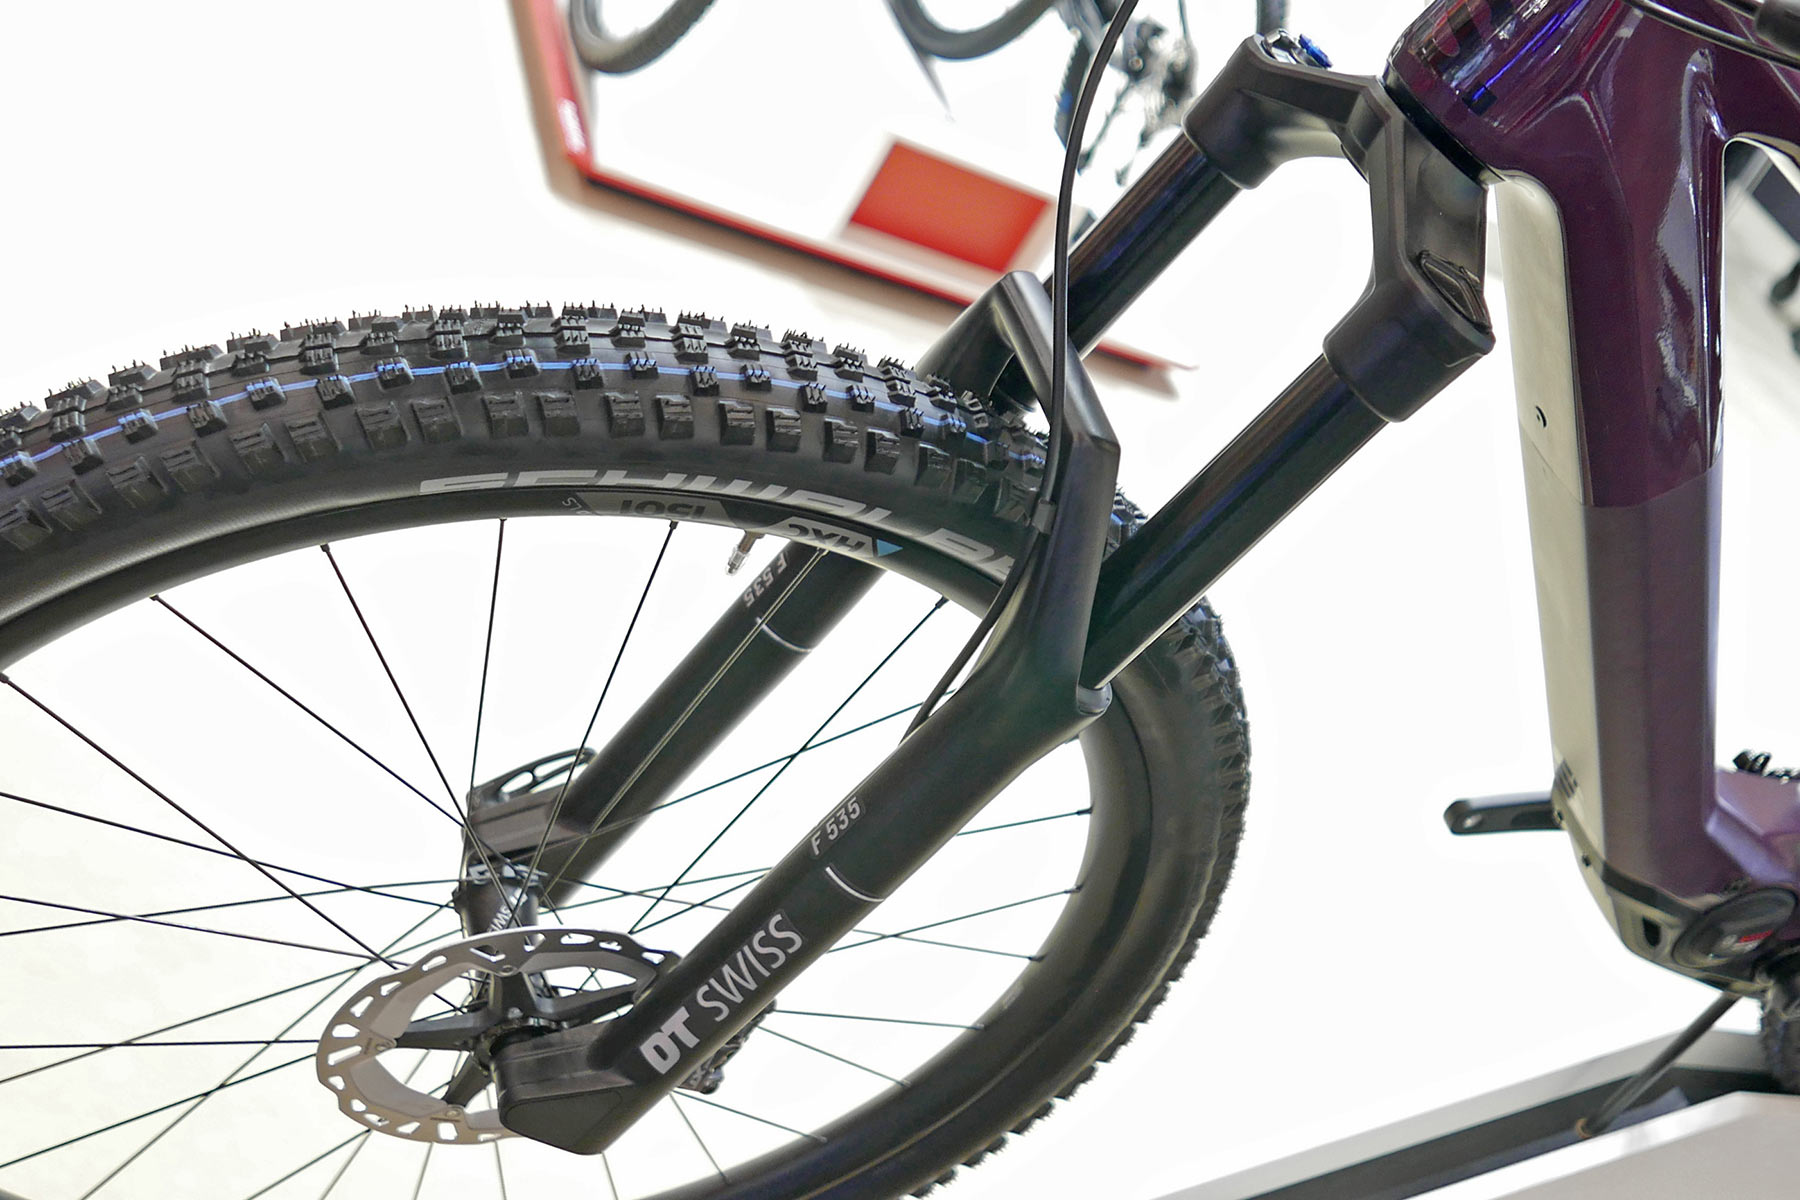 DT Swiss 535 trail all-mountain bike suspension upgrades, new ONE & standard forks and shocks